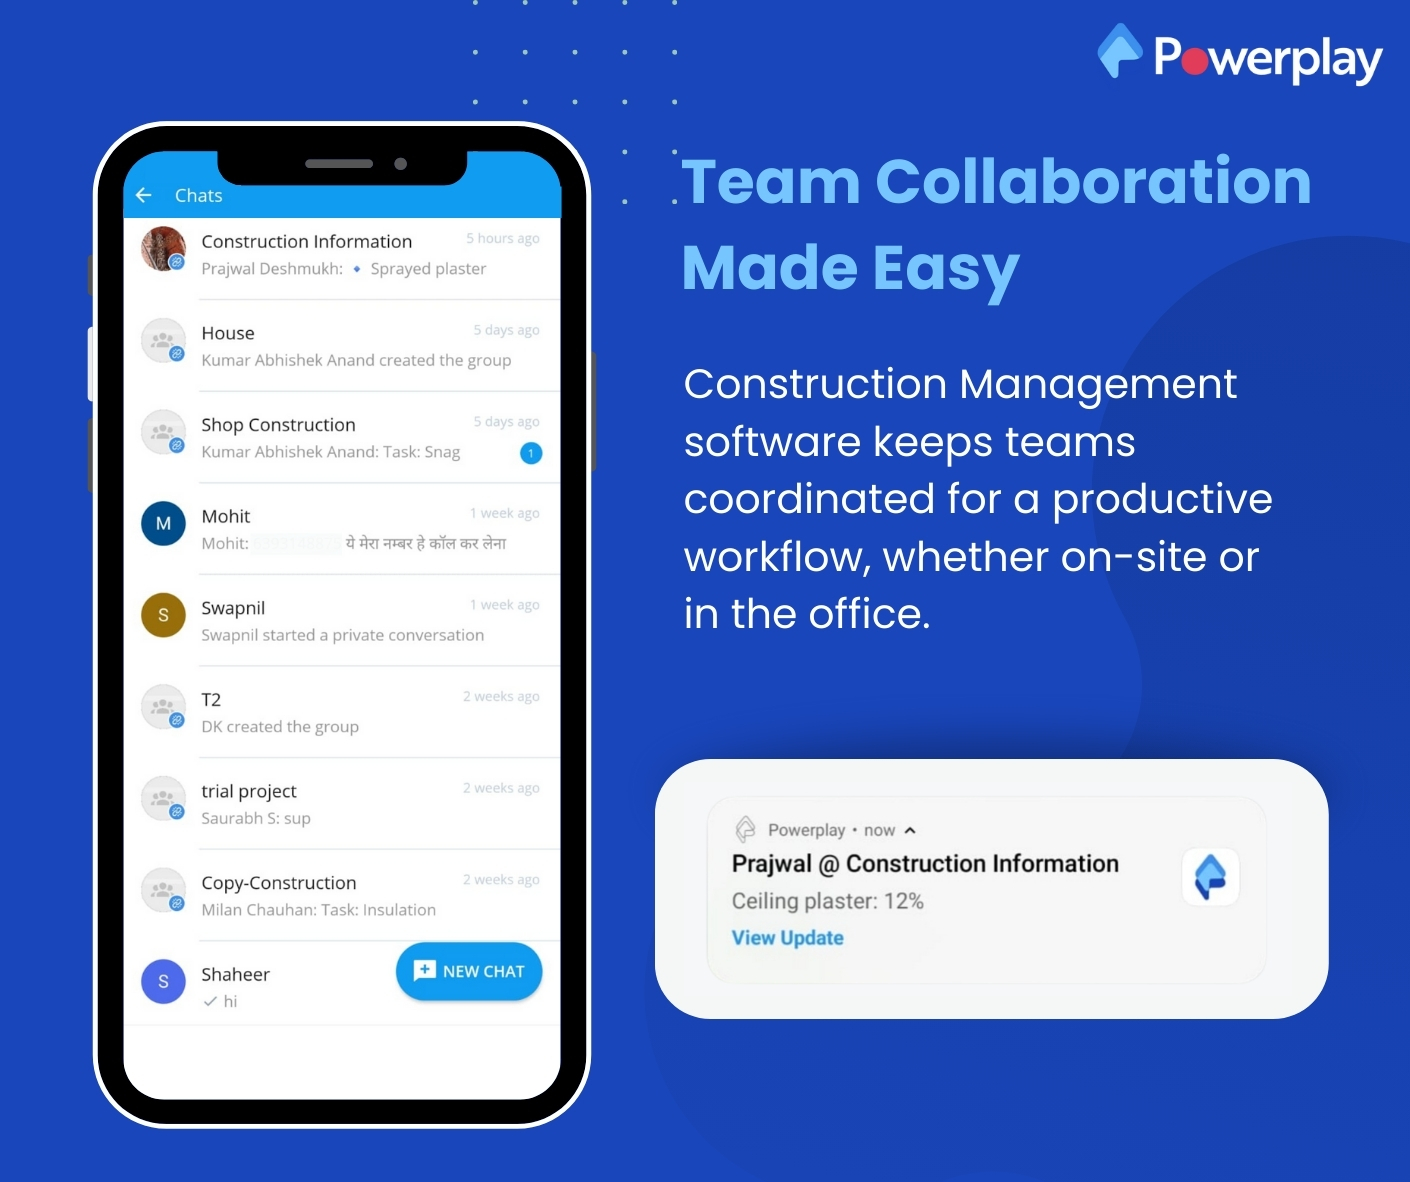 Team collaboration made easy